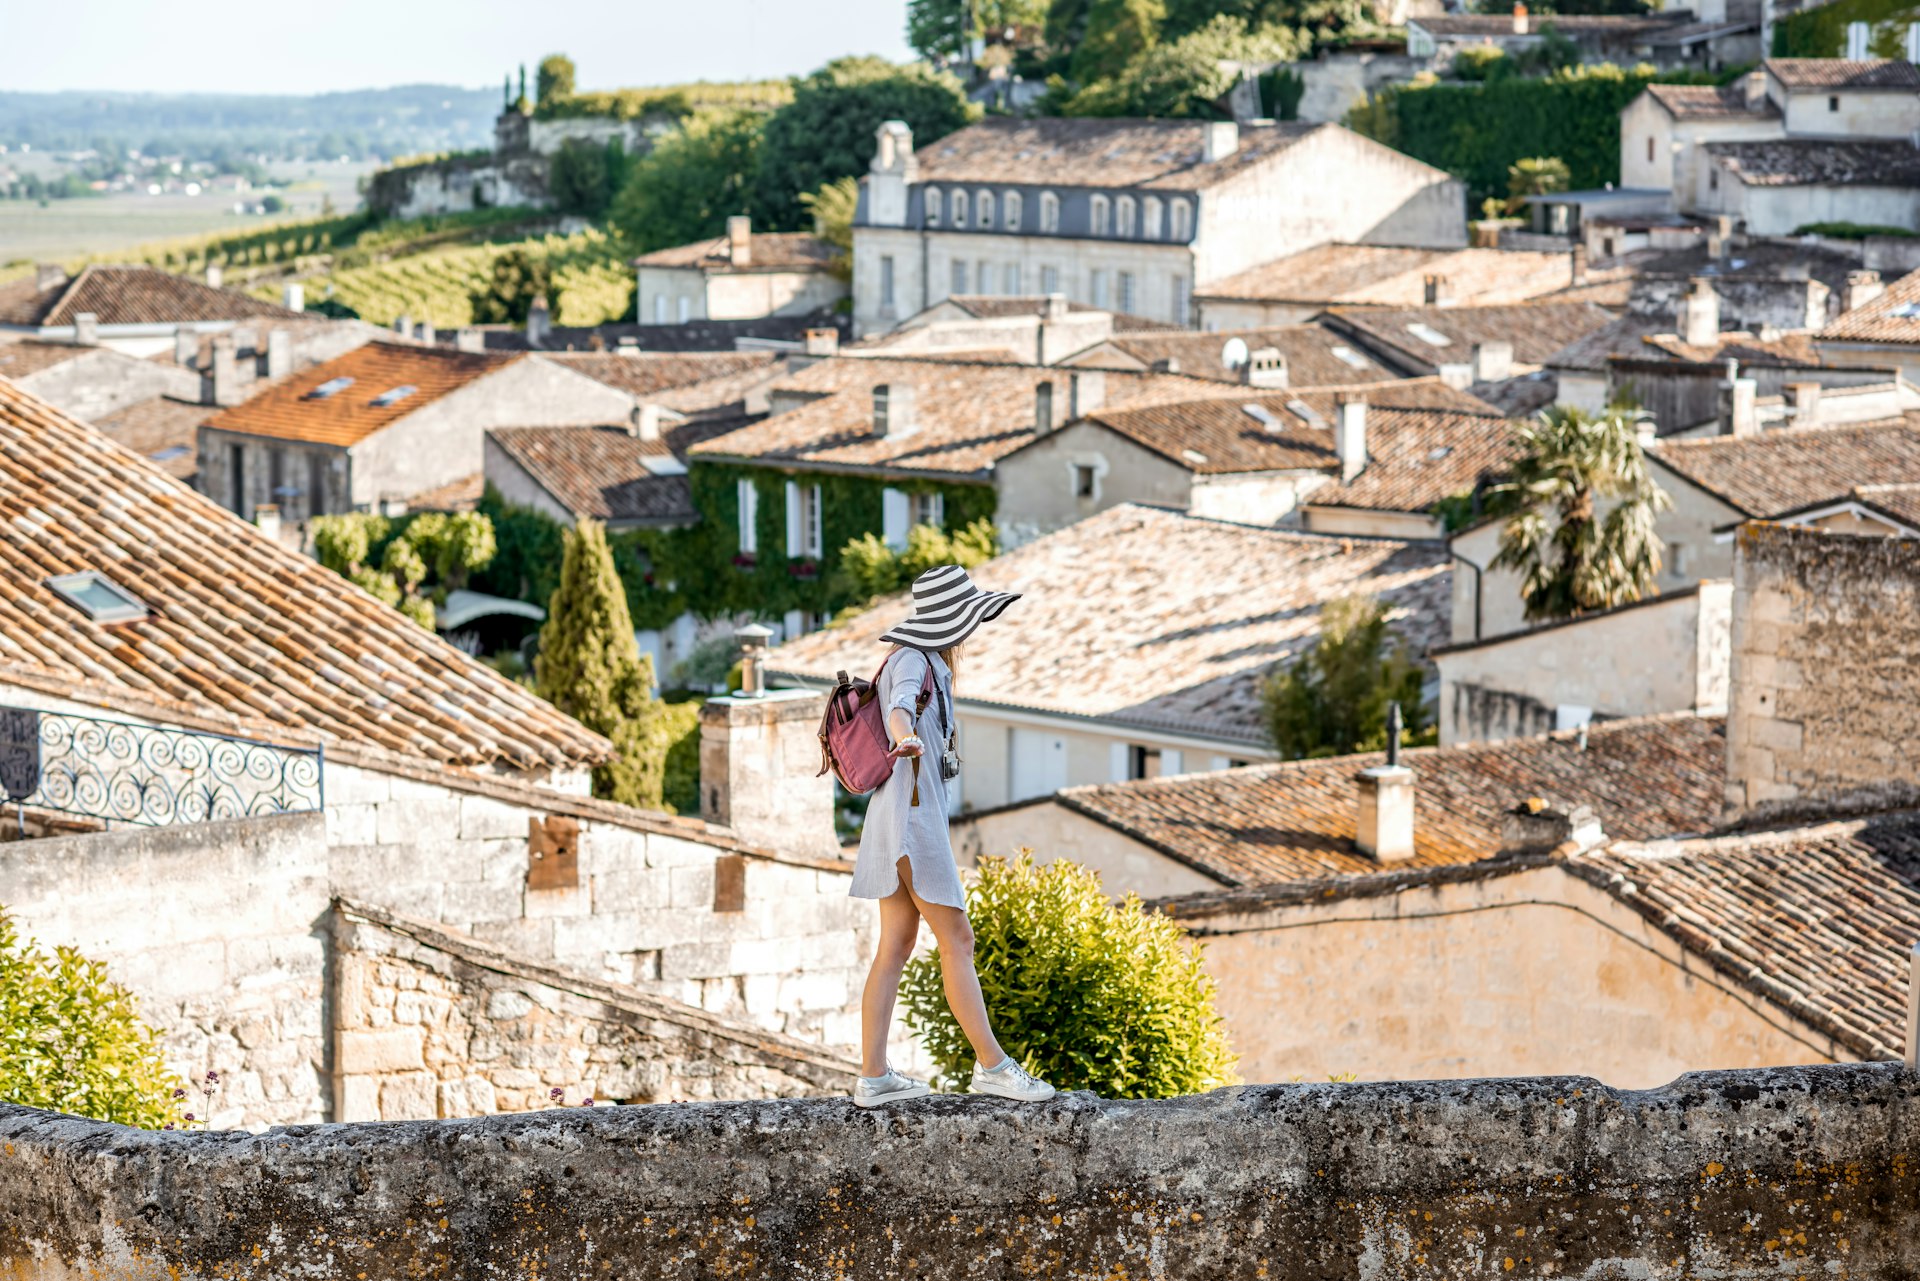 A woman walks carefully along a wall in the village of Saint Emilion in France